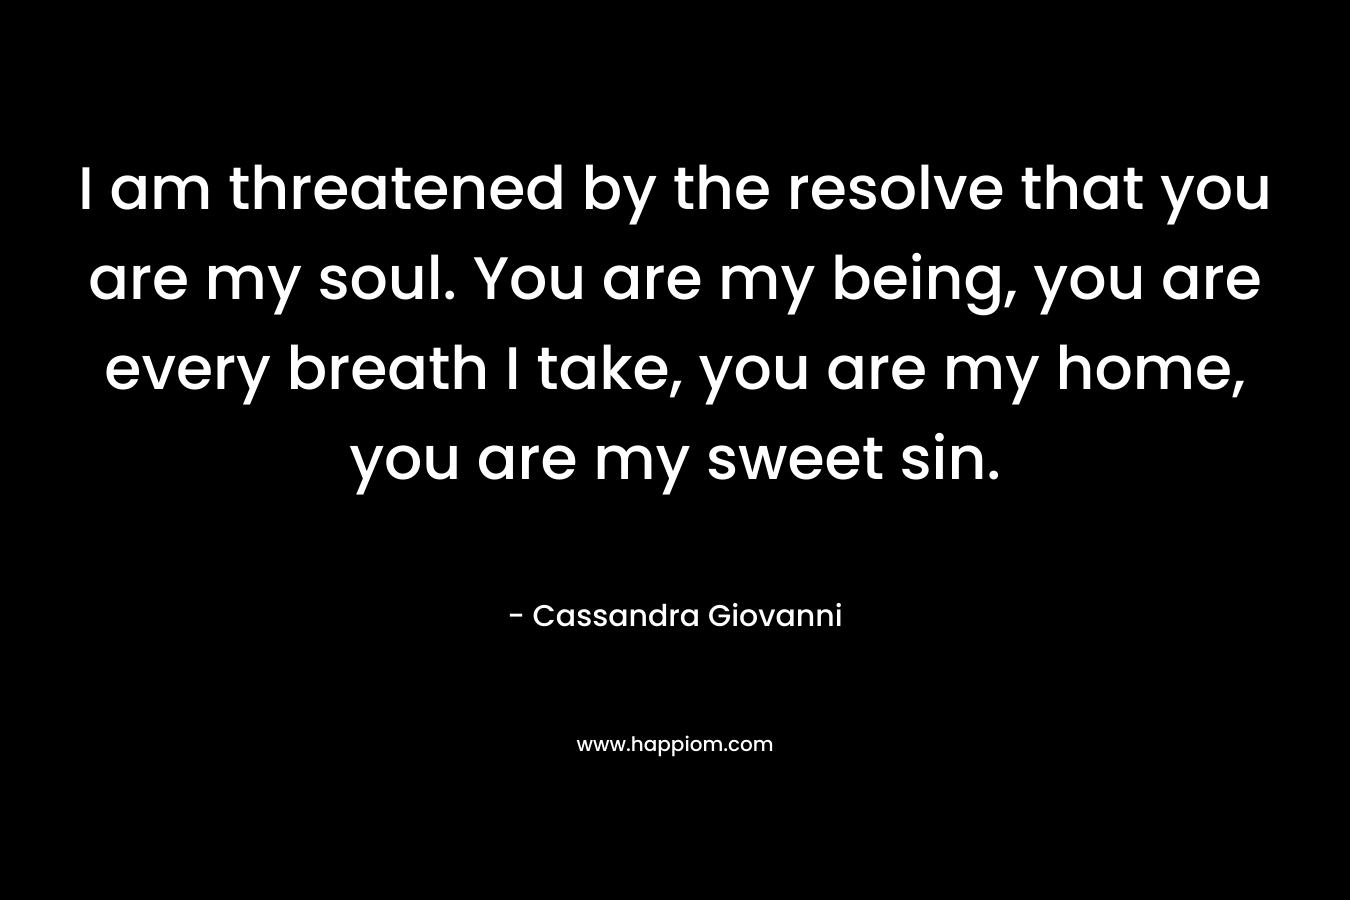 I am threatened by the resolve that you are my soul. You are my being, you are every breath I take, you are my home, you are my sweet sin. – Cassandra Giovanni